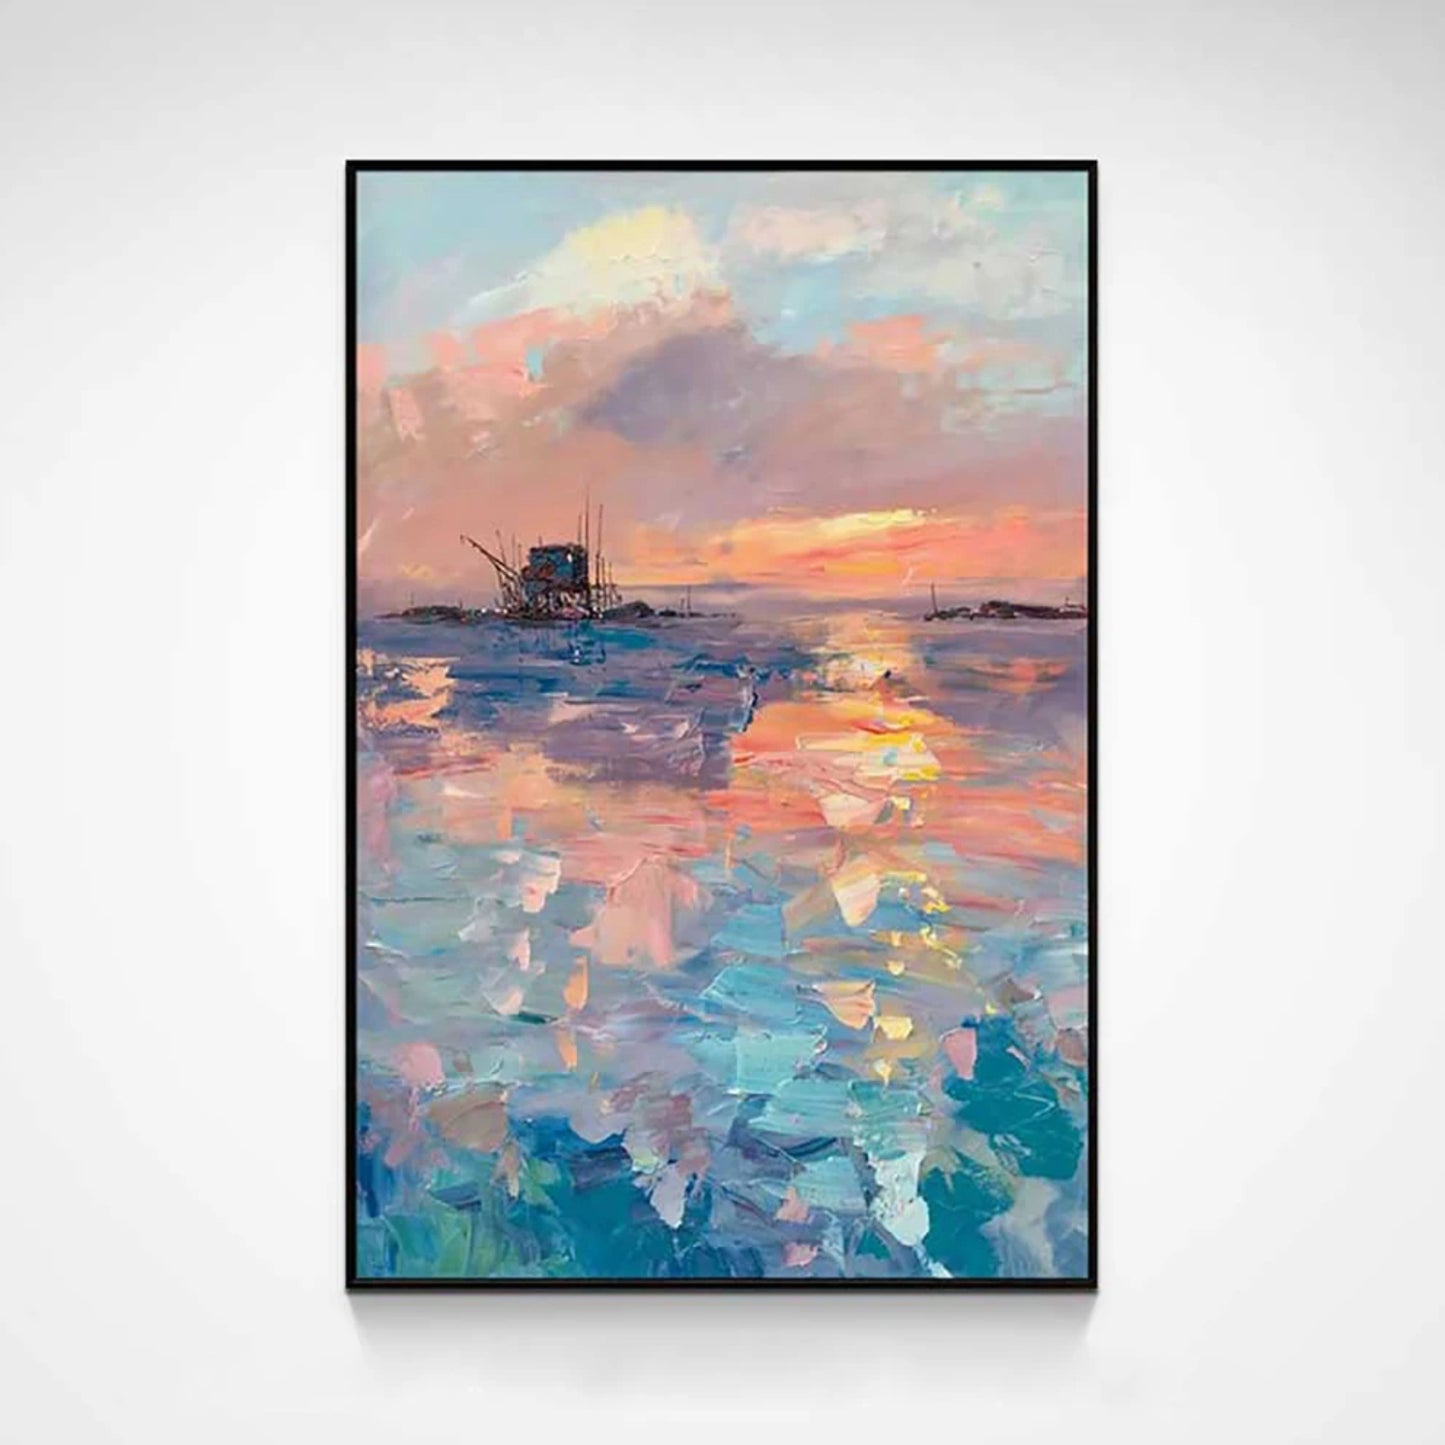 Peaceful Dazzling Sunset Seascape Textured Oil Painting